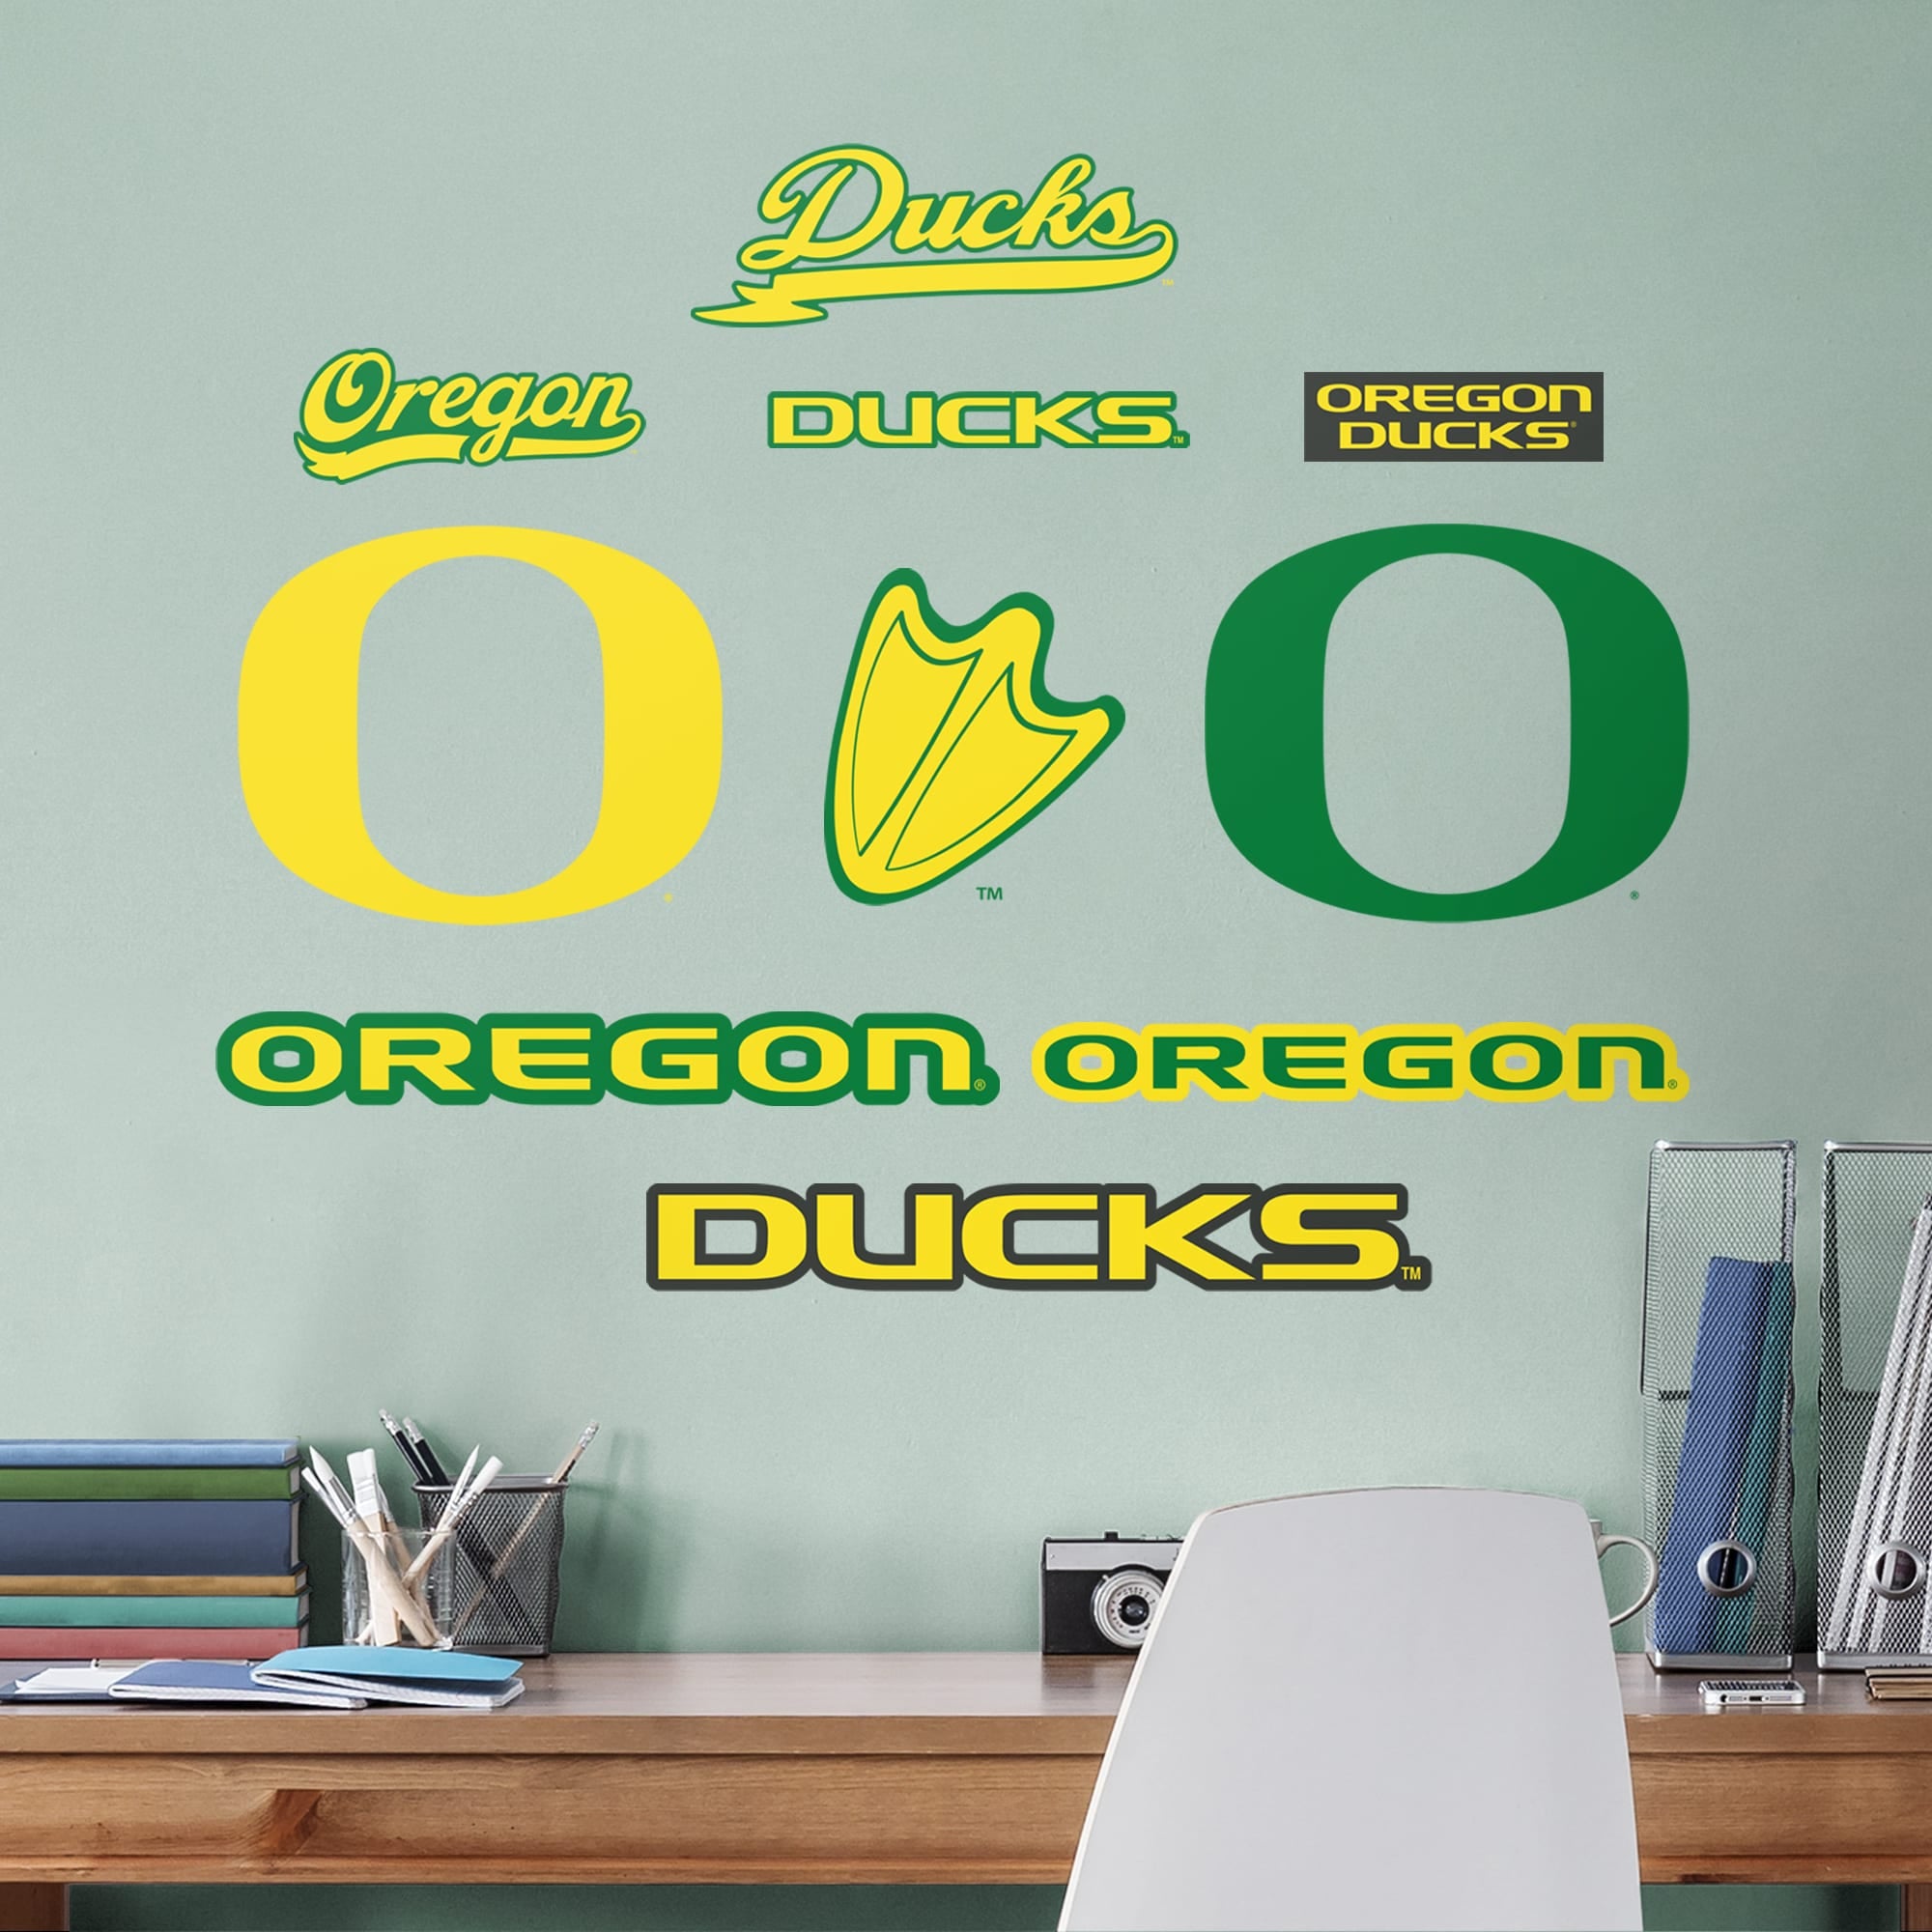 Oregon Ducks: Logo Assortment - Officially Licensed Removable Wall Decals 15.0"W x 12.0"H by Fathead | Vinyl